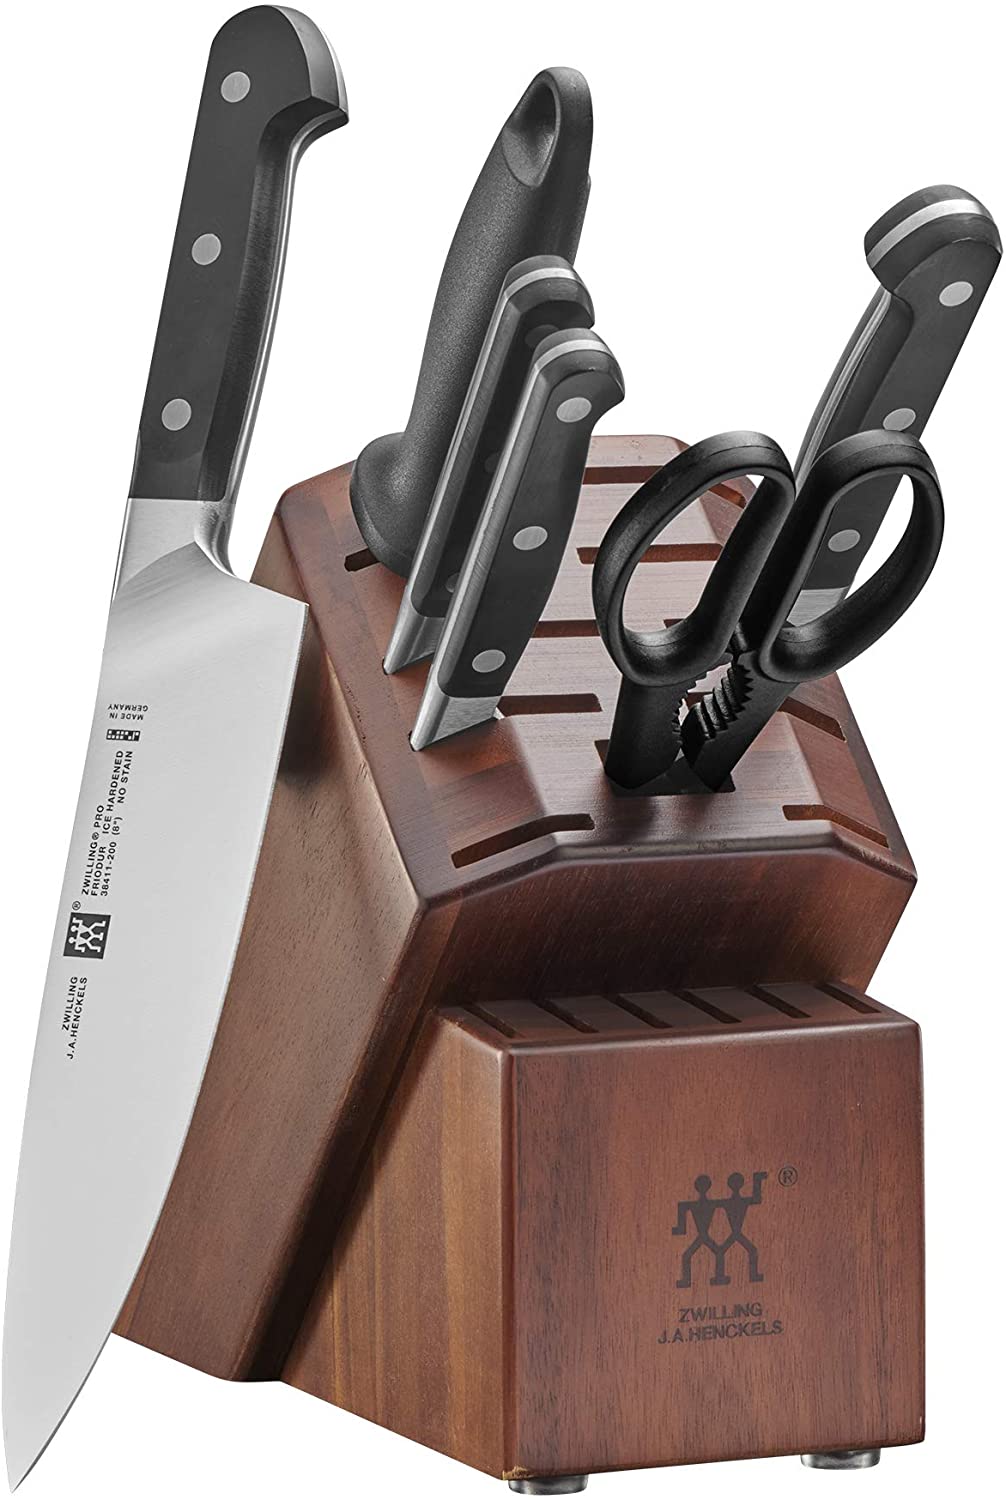 Zwilling knives review: J.A. Henckels Pro 7-piece Block Set in Stainless Steel and Black